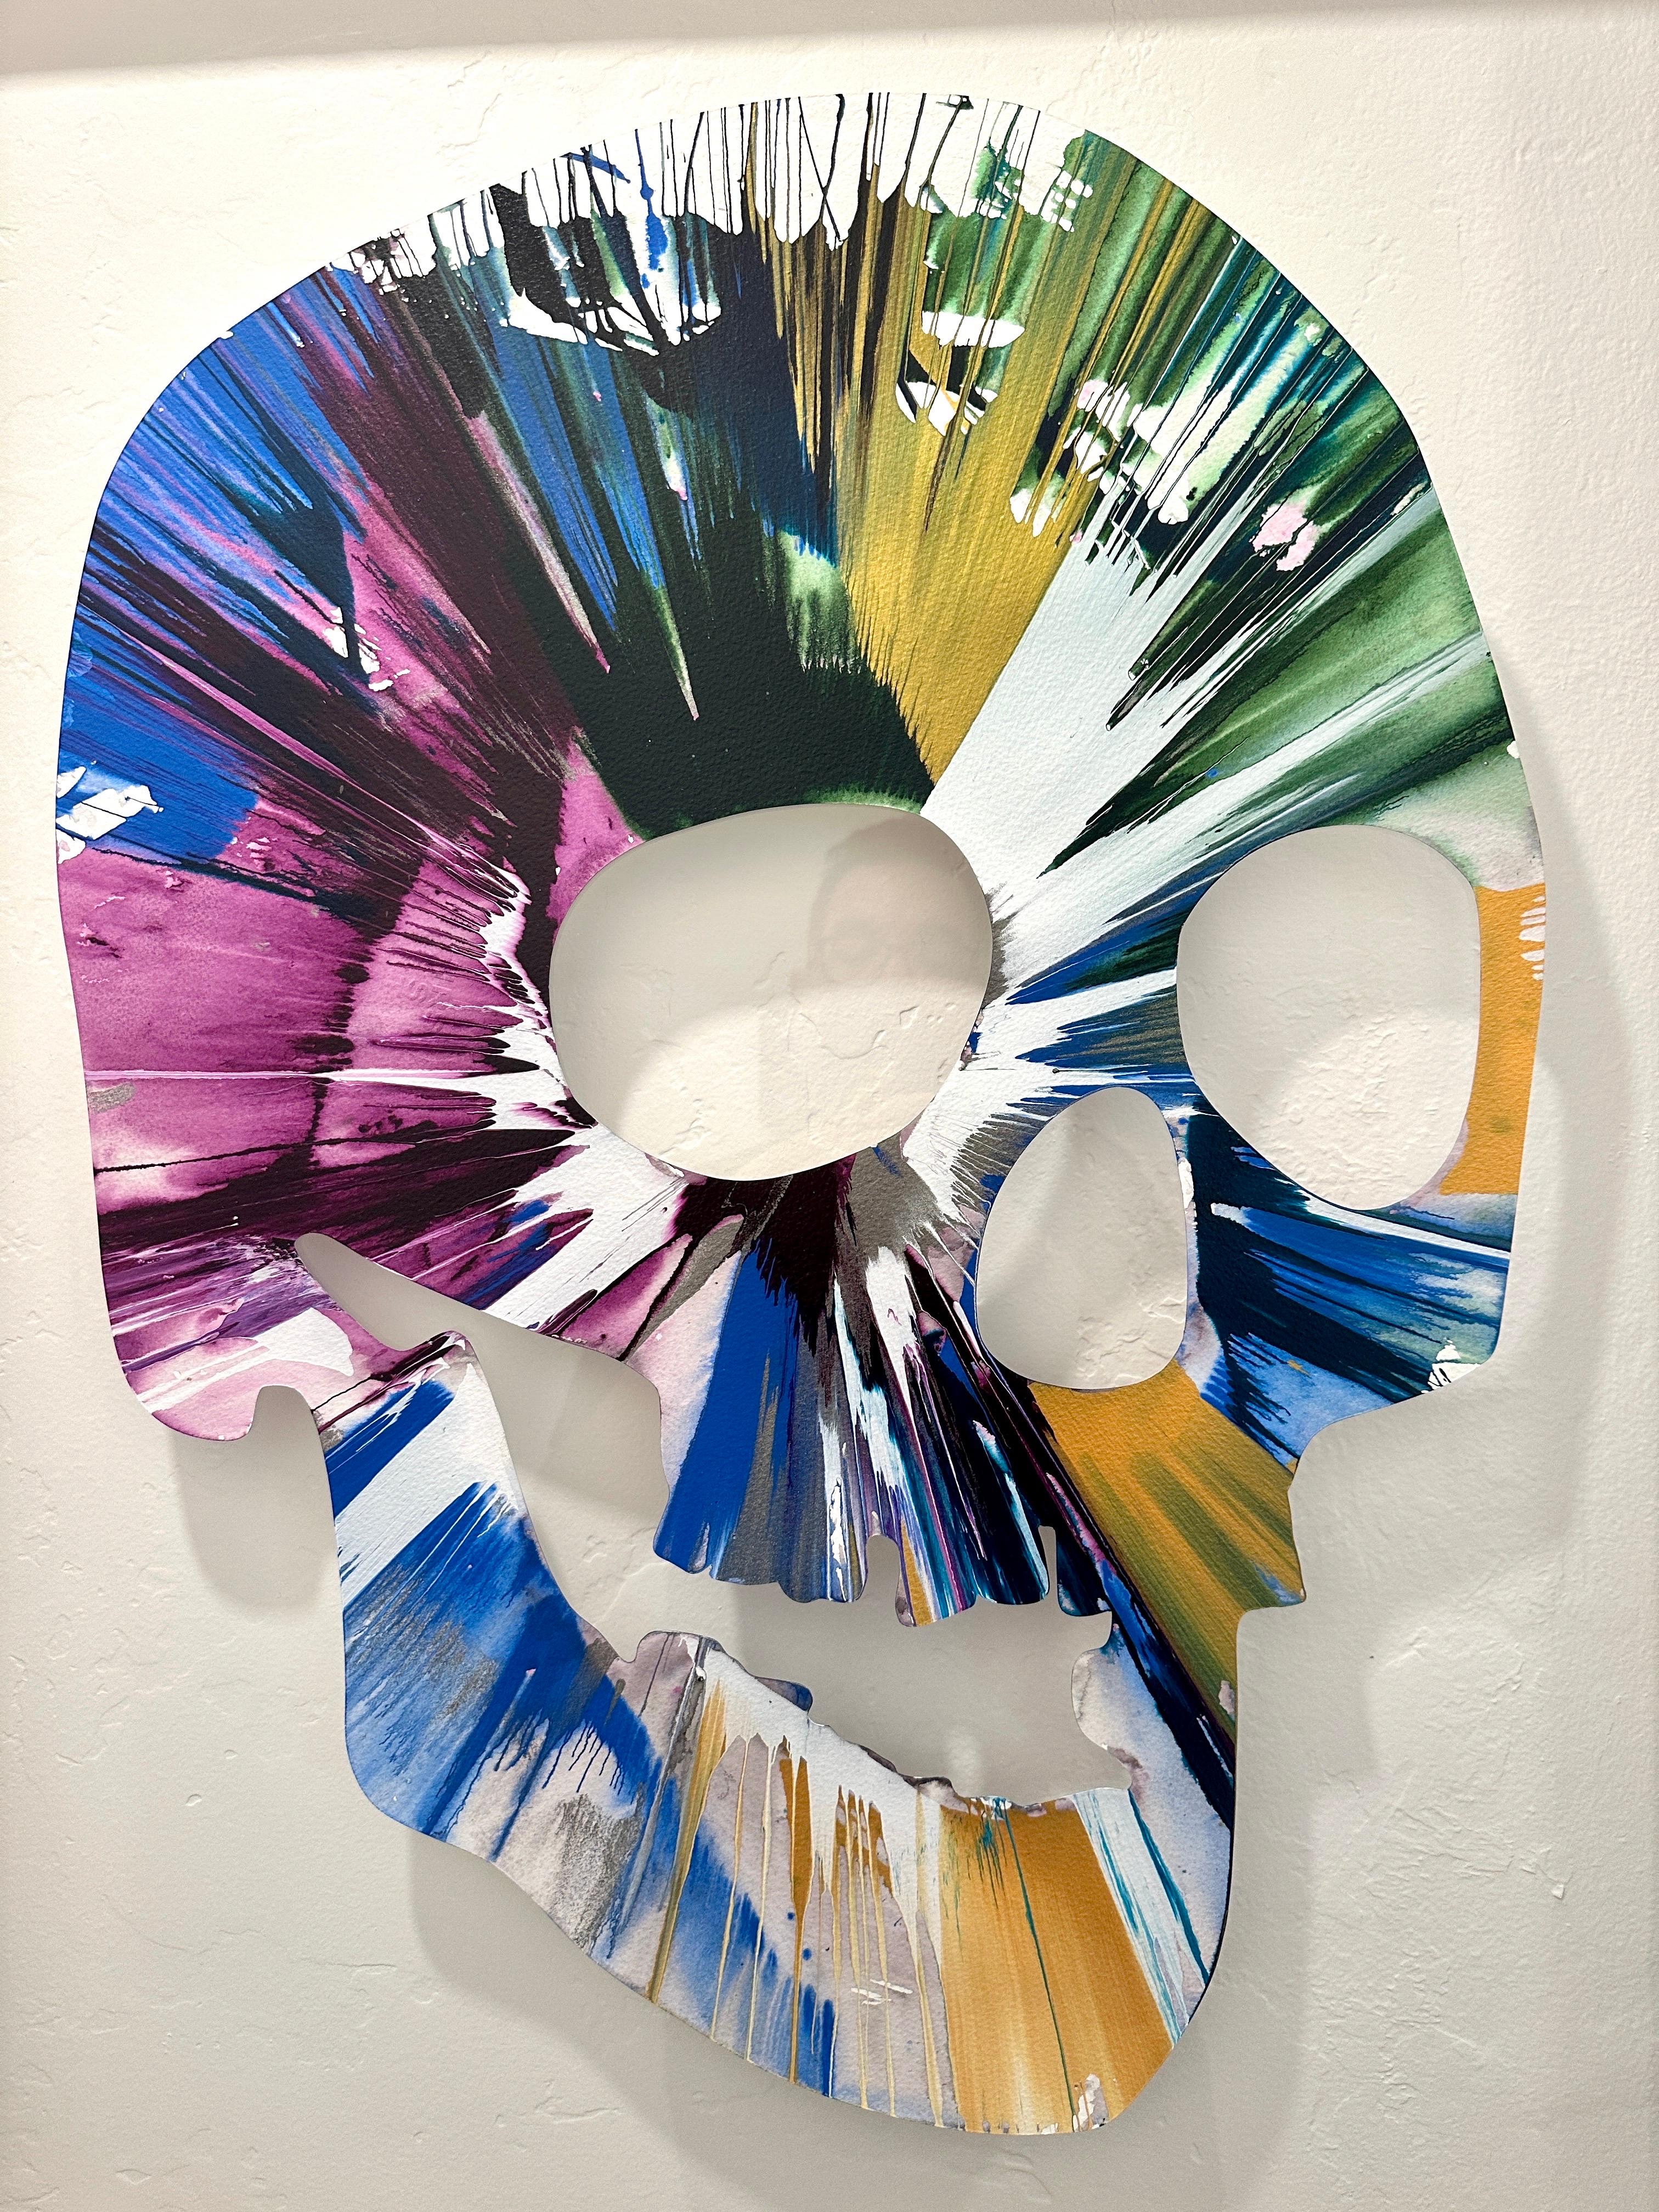 Damien Hirst Skull Spin Painting (Created at Damien Hirst Spin Workshop), 2009 In Good Condition For Sale In East Hampton, NY